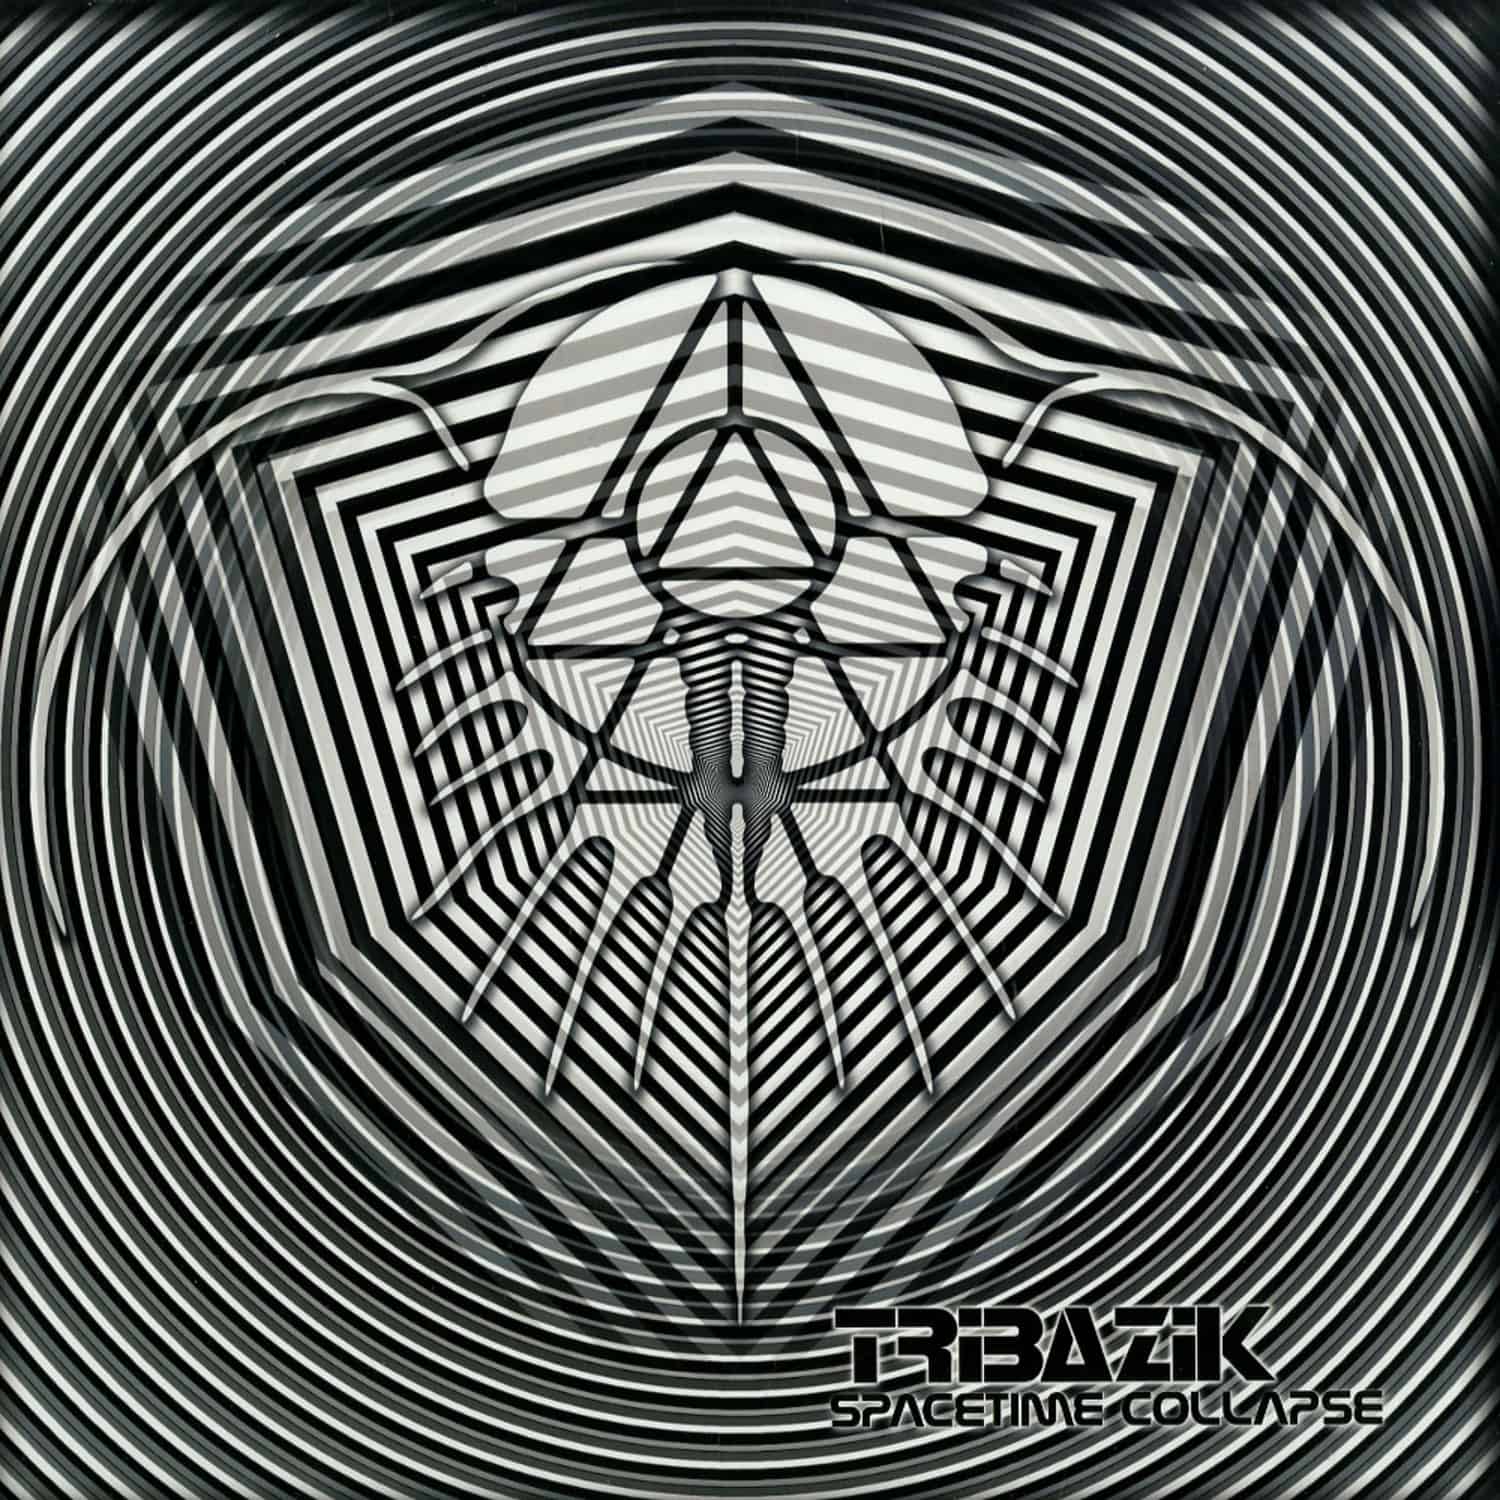 Tribazik - SPACETIME COLLAPSE